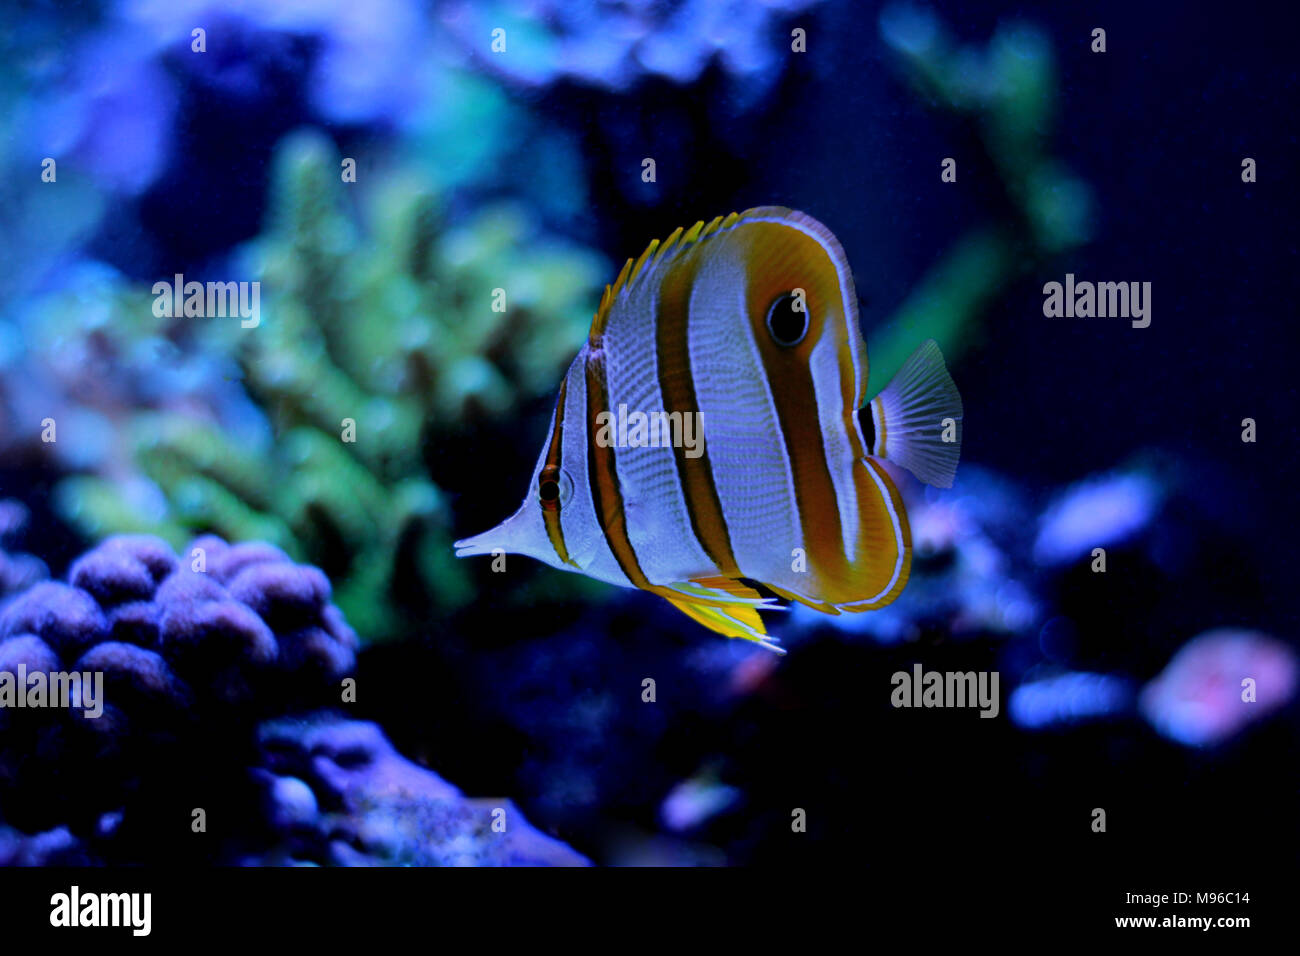 Copperband butterfly fish swim in coral reef aquarium tank Stock Photo